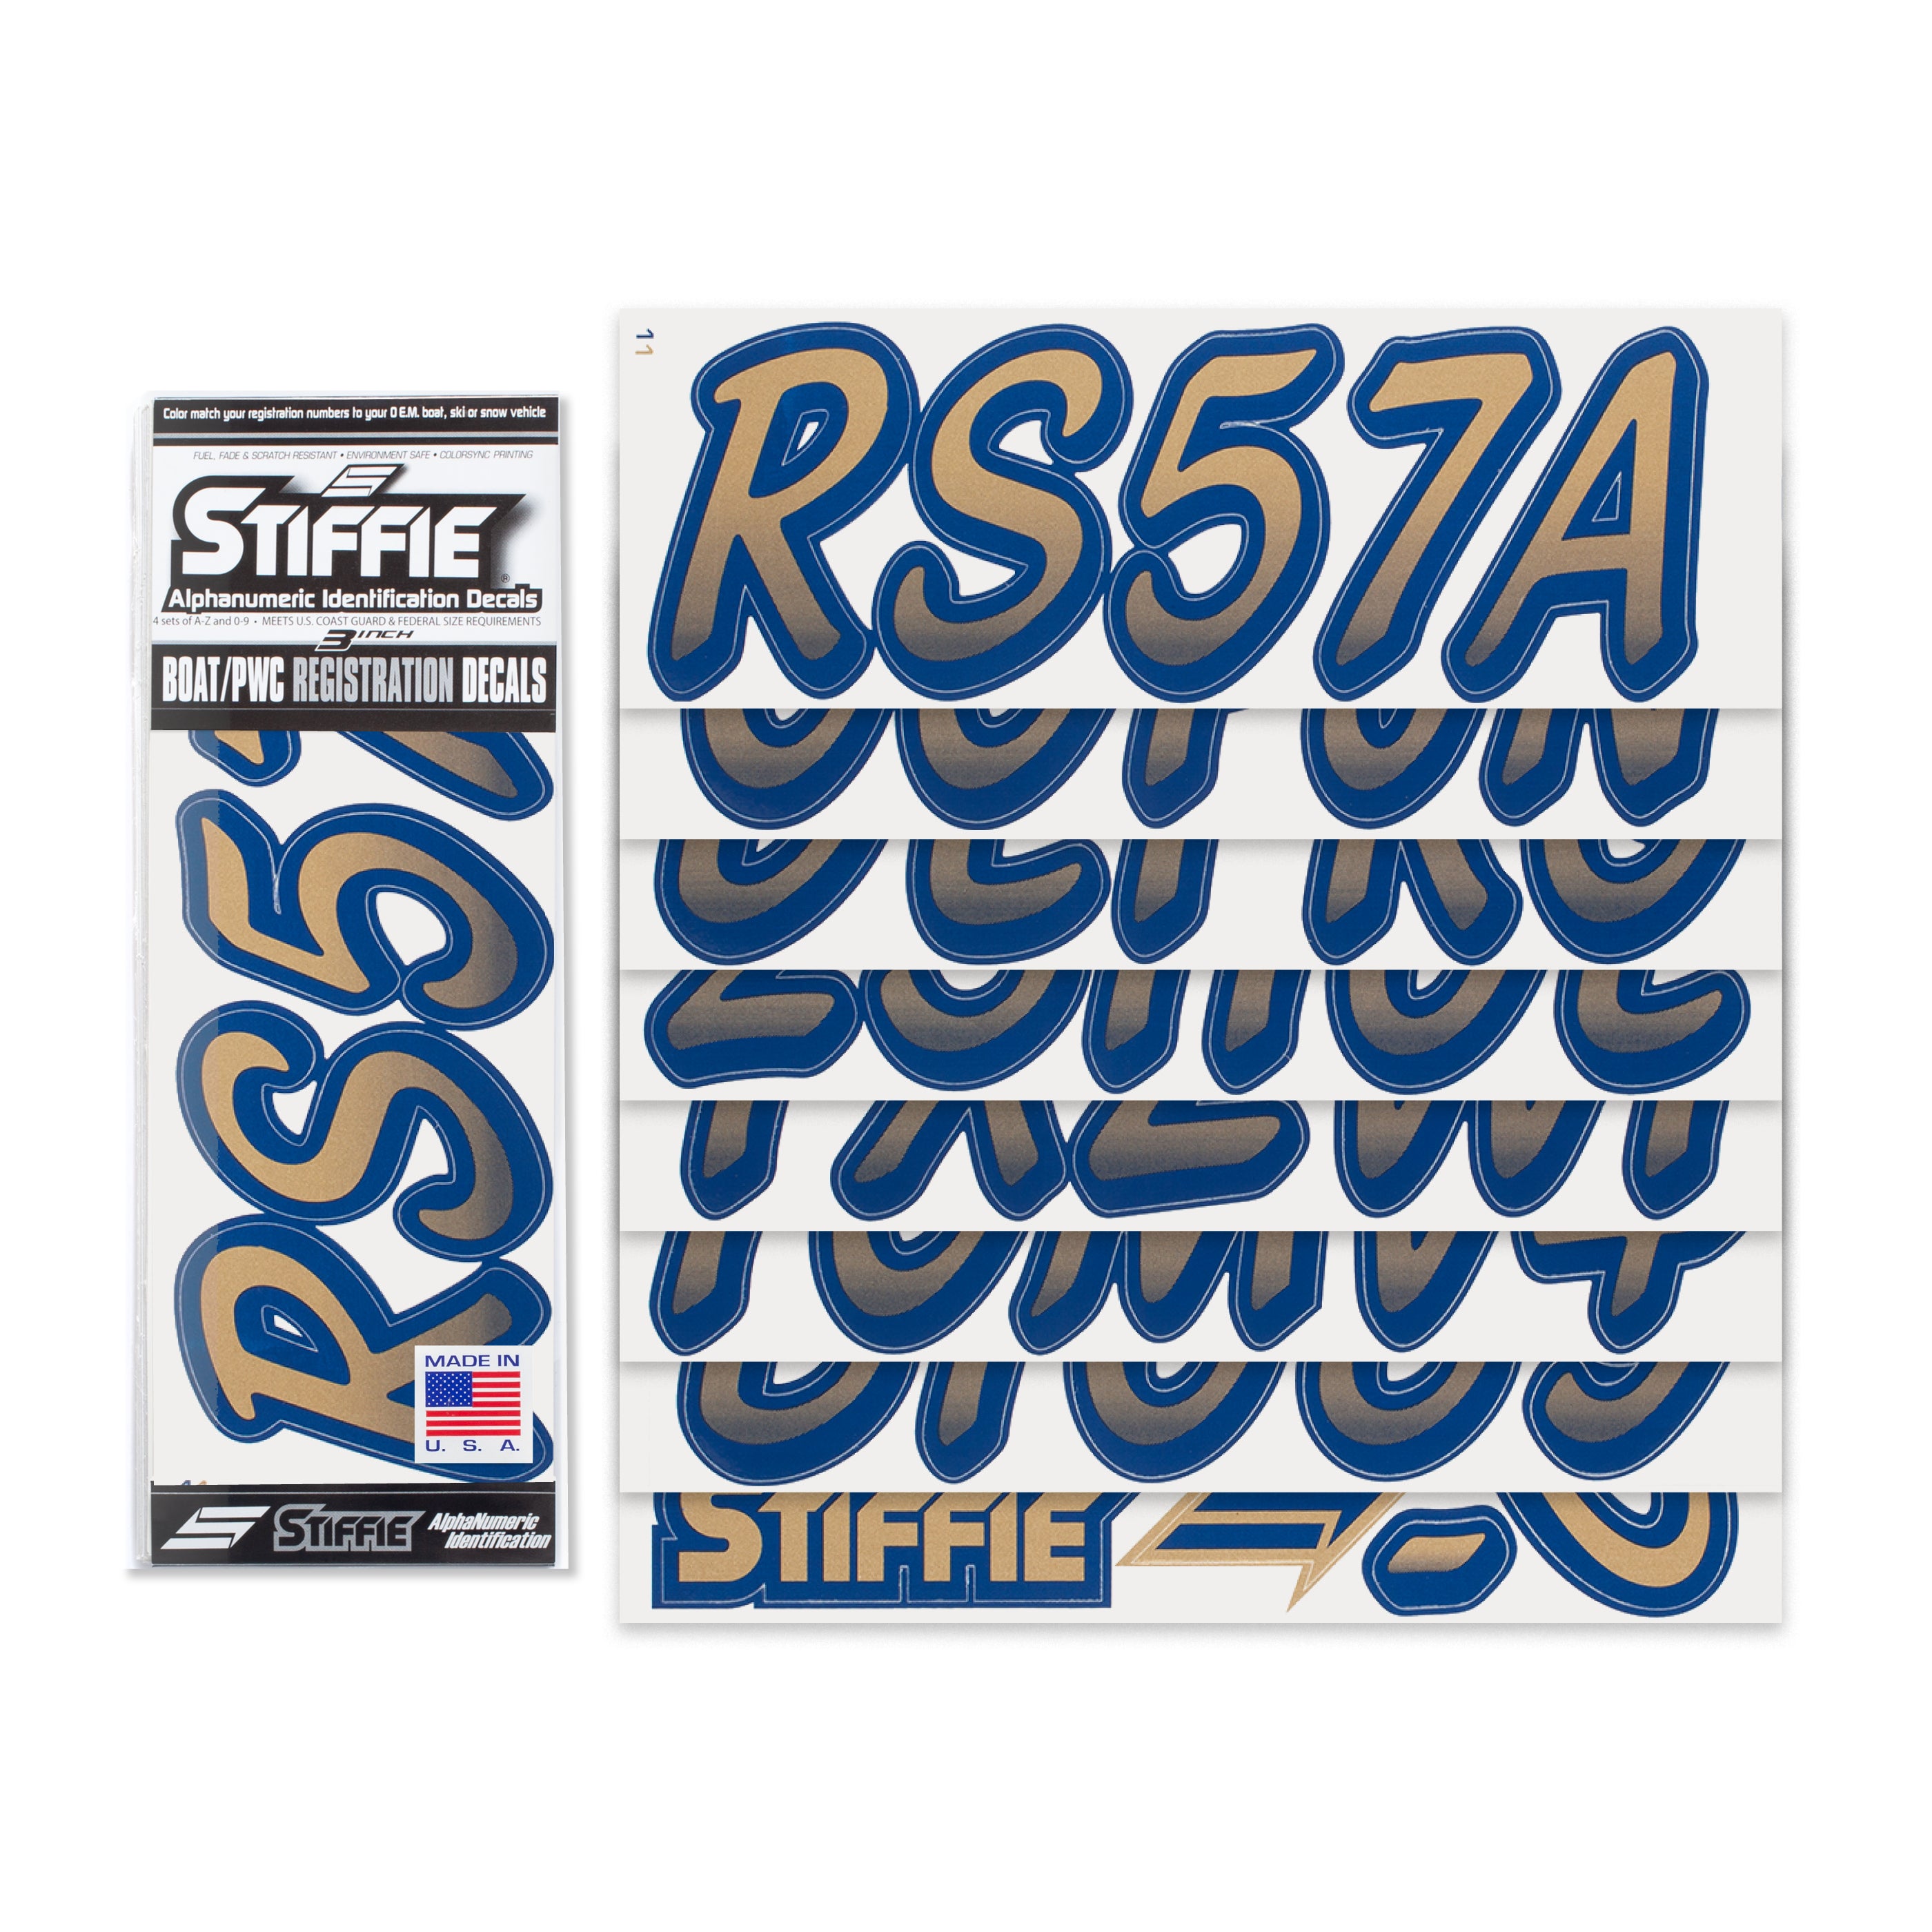 Stiffie Whipline Metallic Gold/Navy 3" Alpha-Numeric Registration Identification Numbers Stickers Decals for Boats & Personal Watercraft